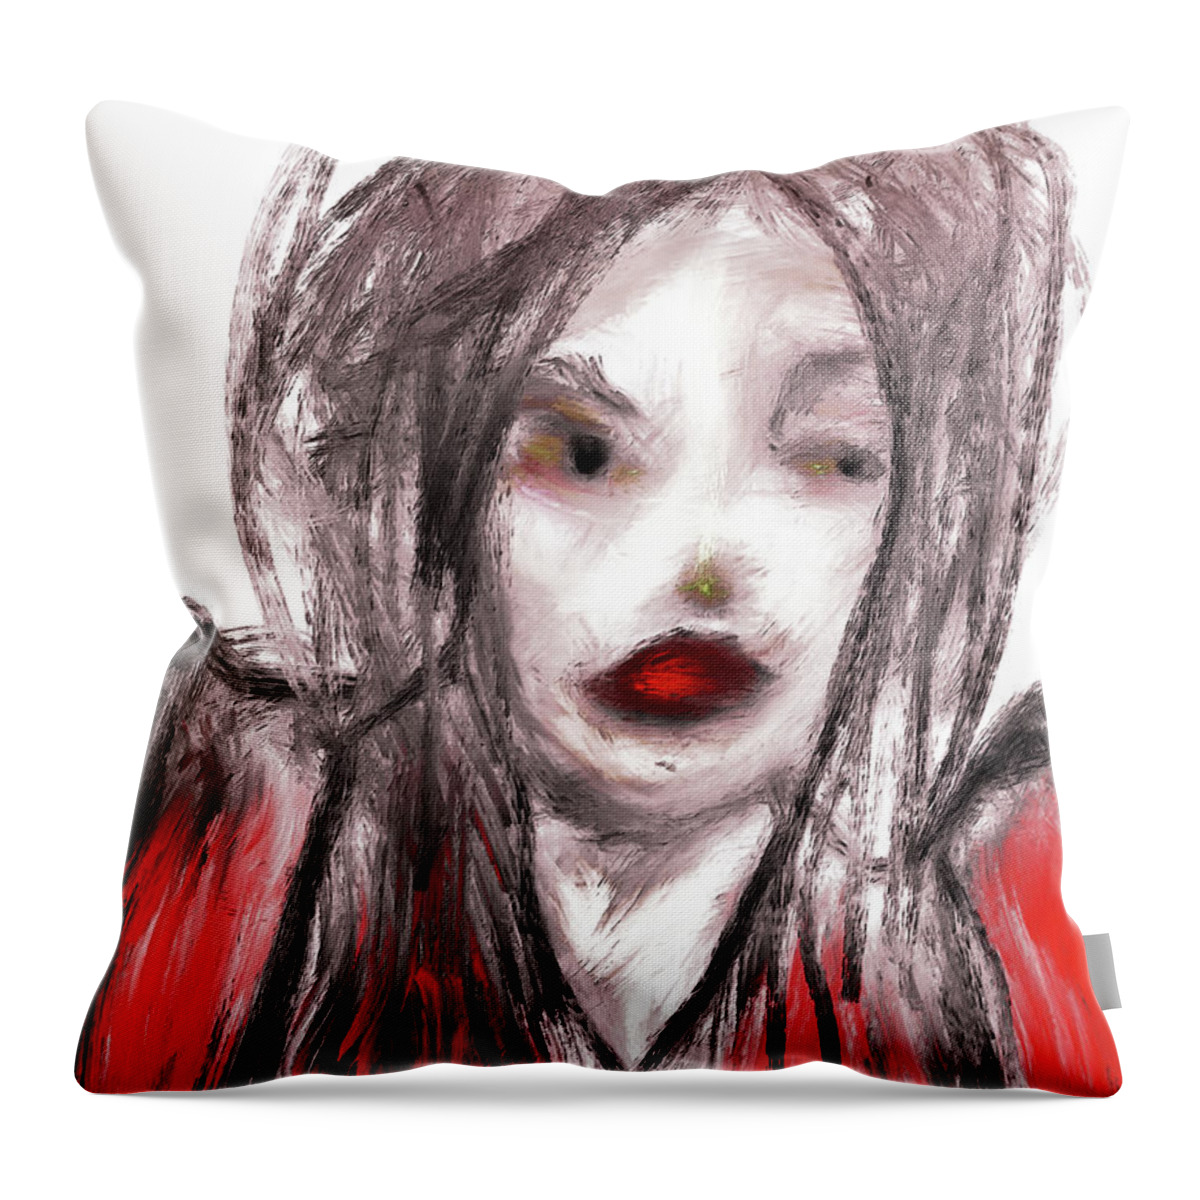 Geometry Throw Pillow featuring the painting 41221 C by Bill Owen